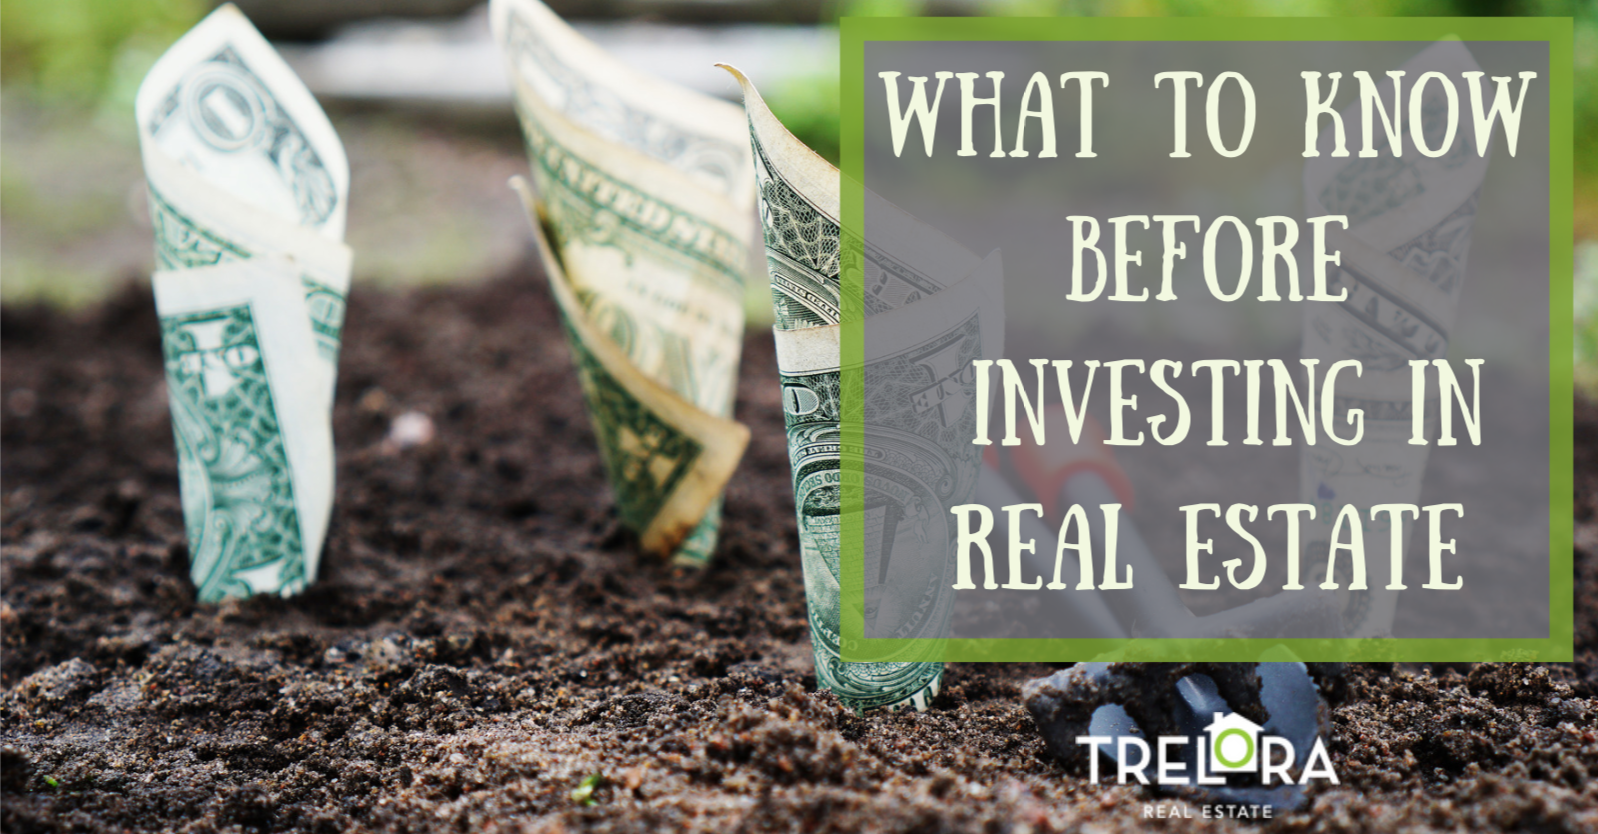 What to Know Before Investing In Real Estate